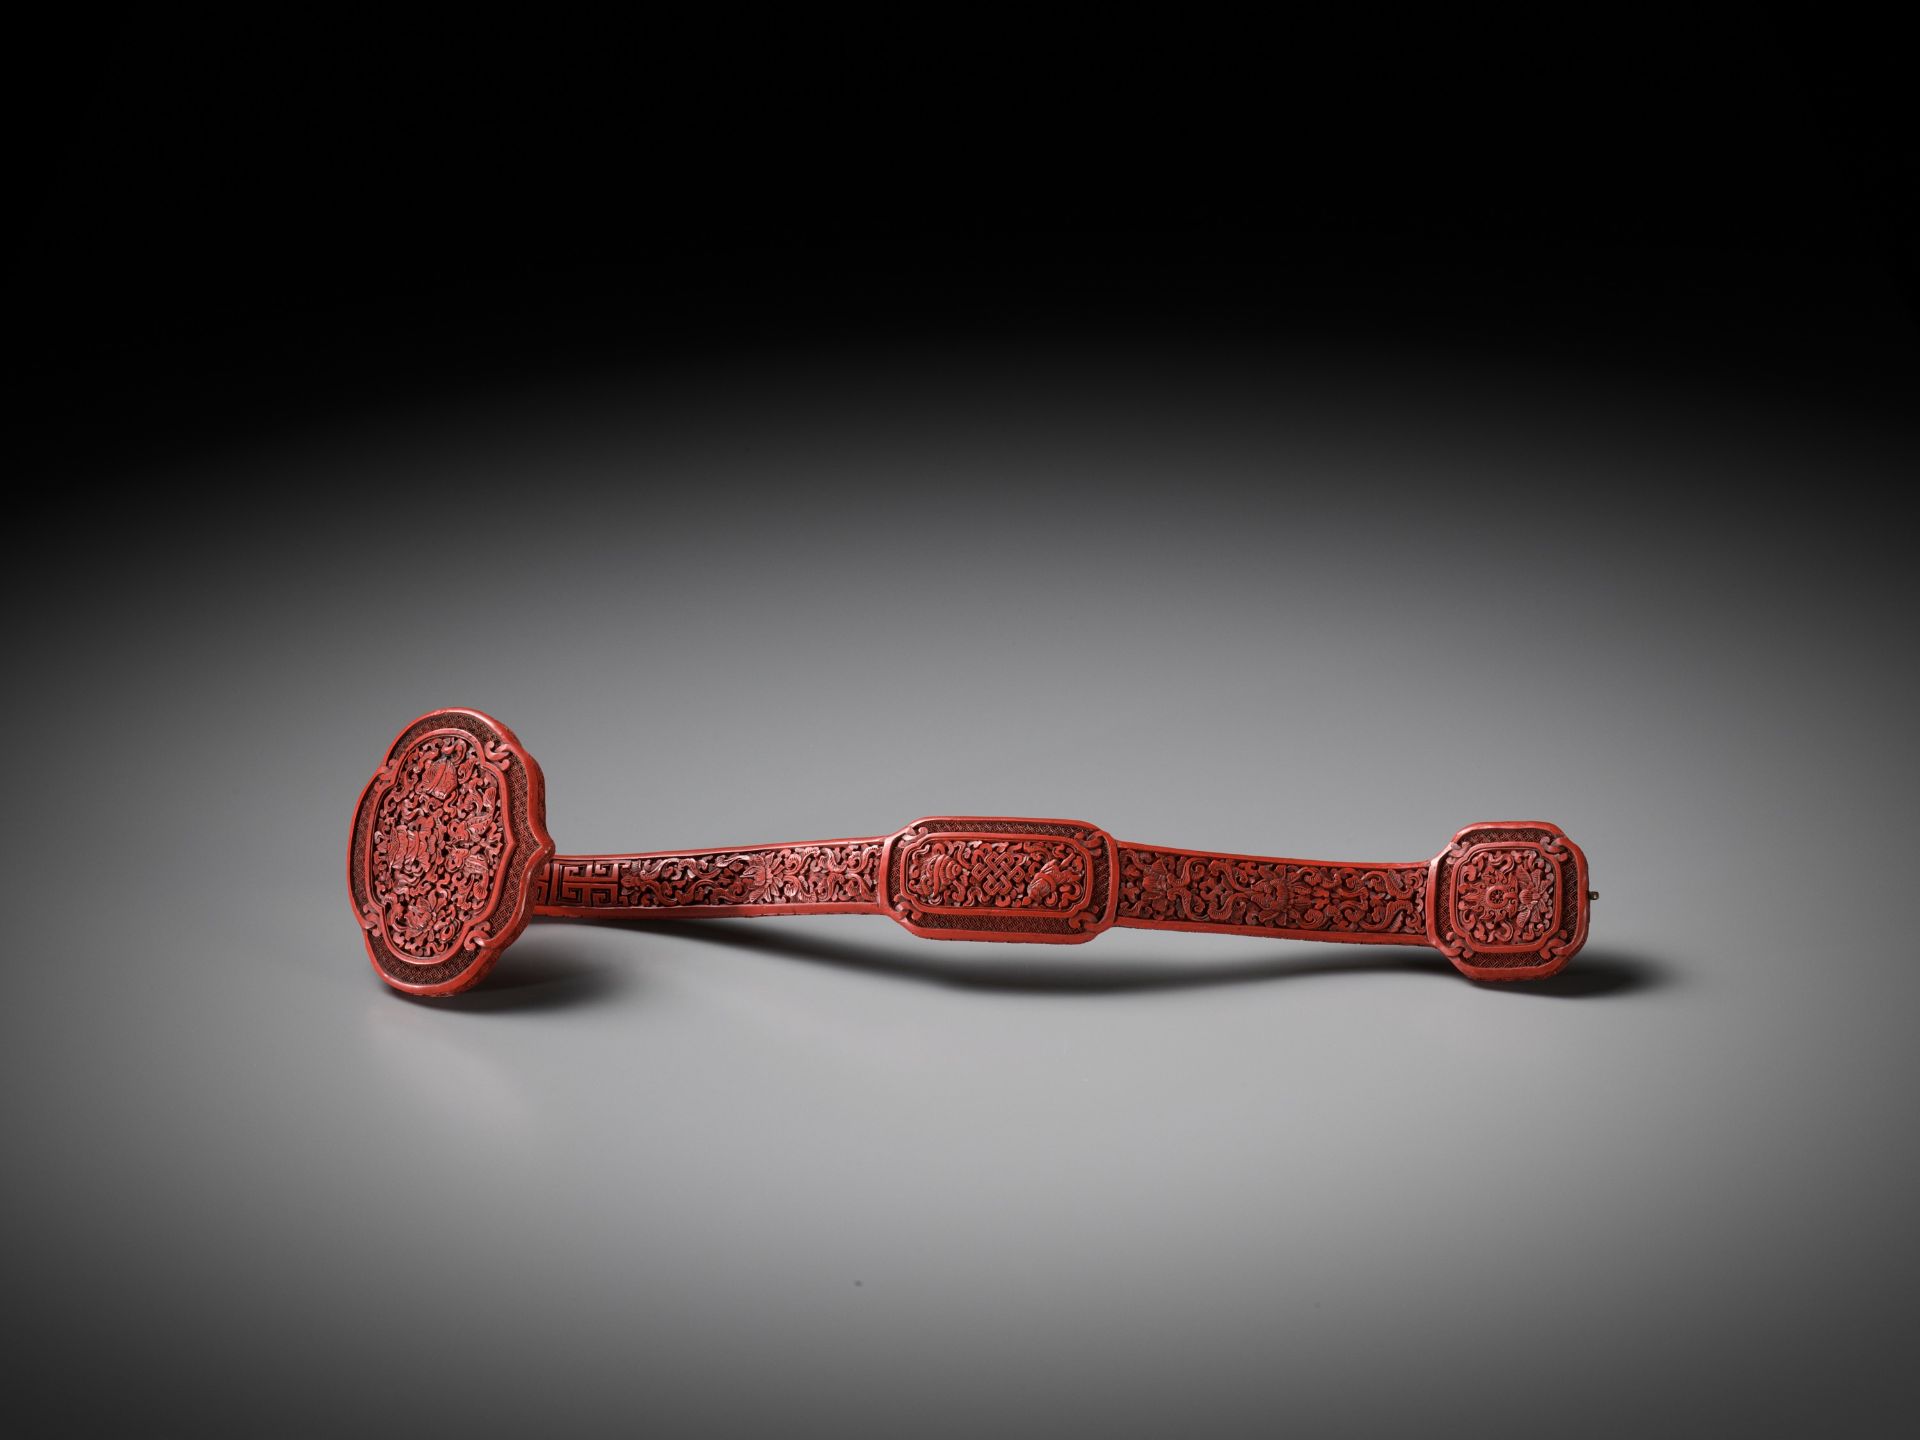 A CARVED CINNABAR LACQUER 'BAJIXIANG' RUYI SCEPTER, QING DYNASTY - Image 2 of 10